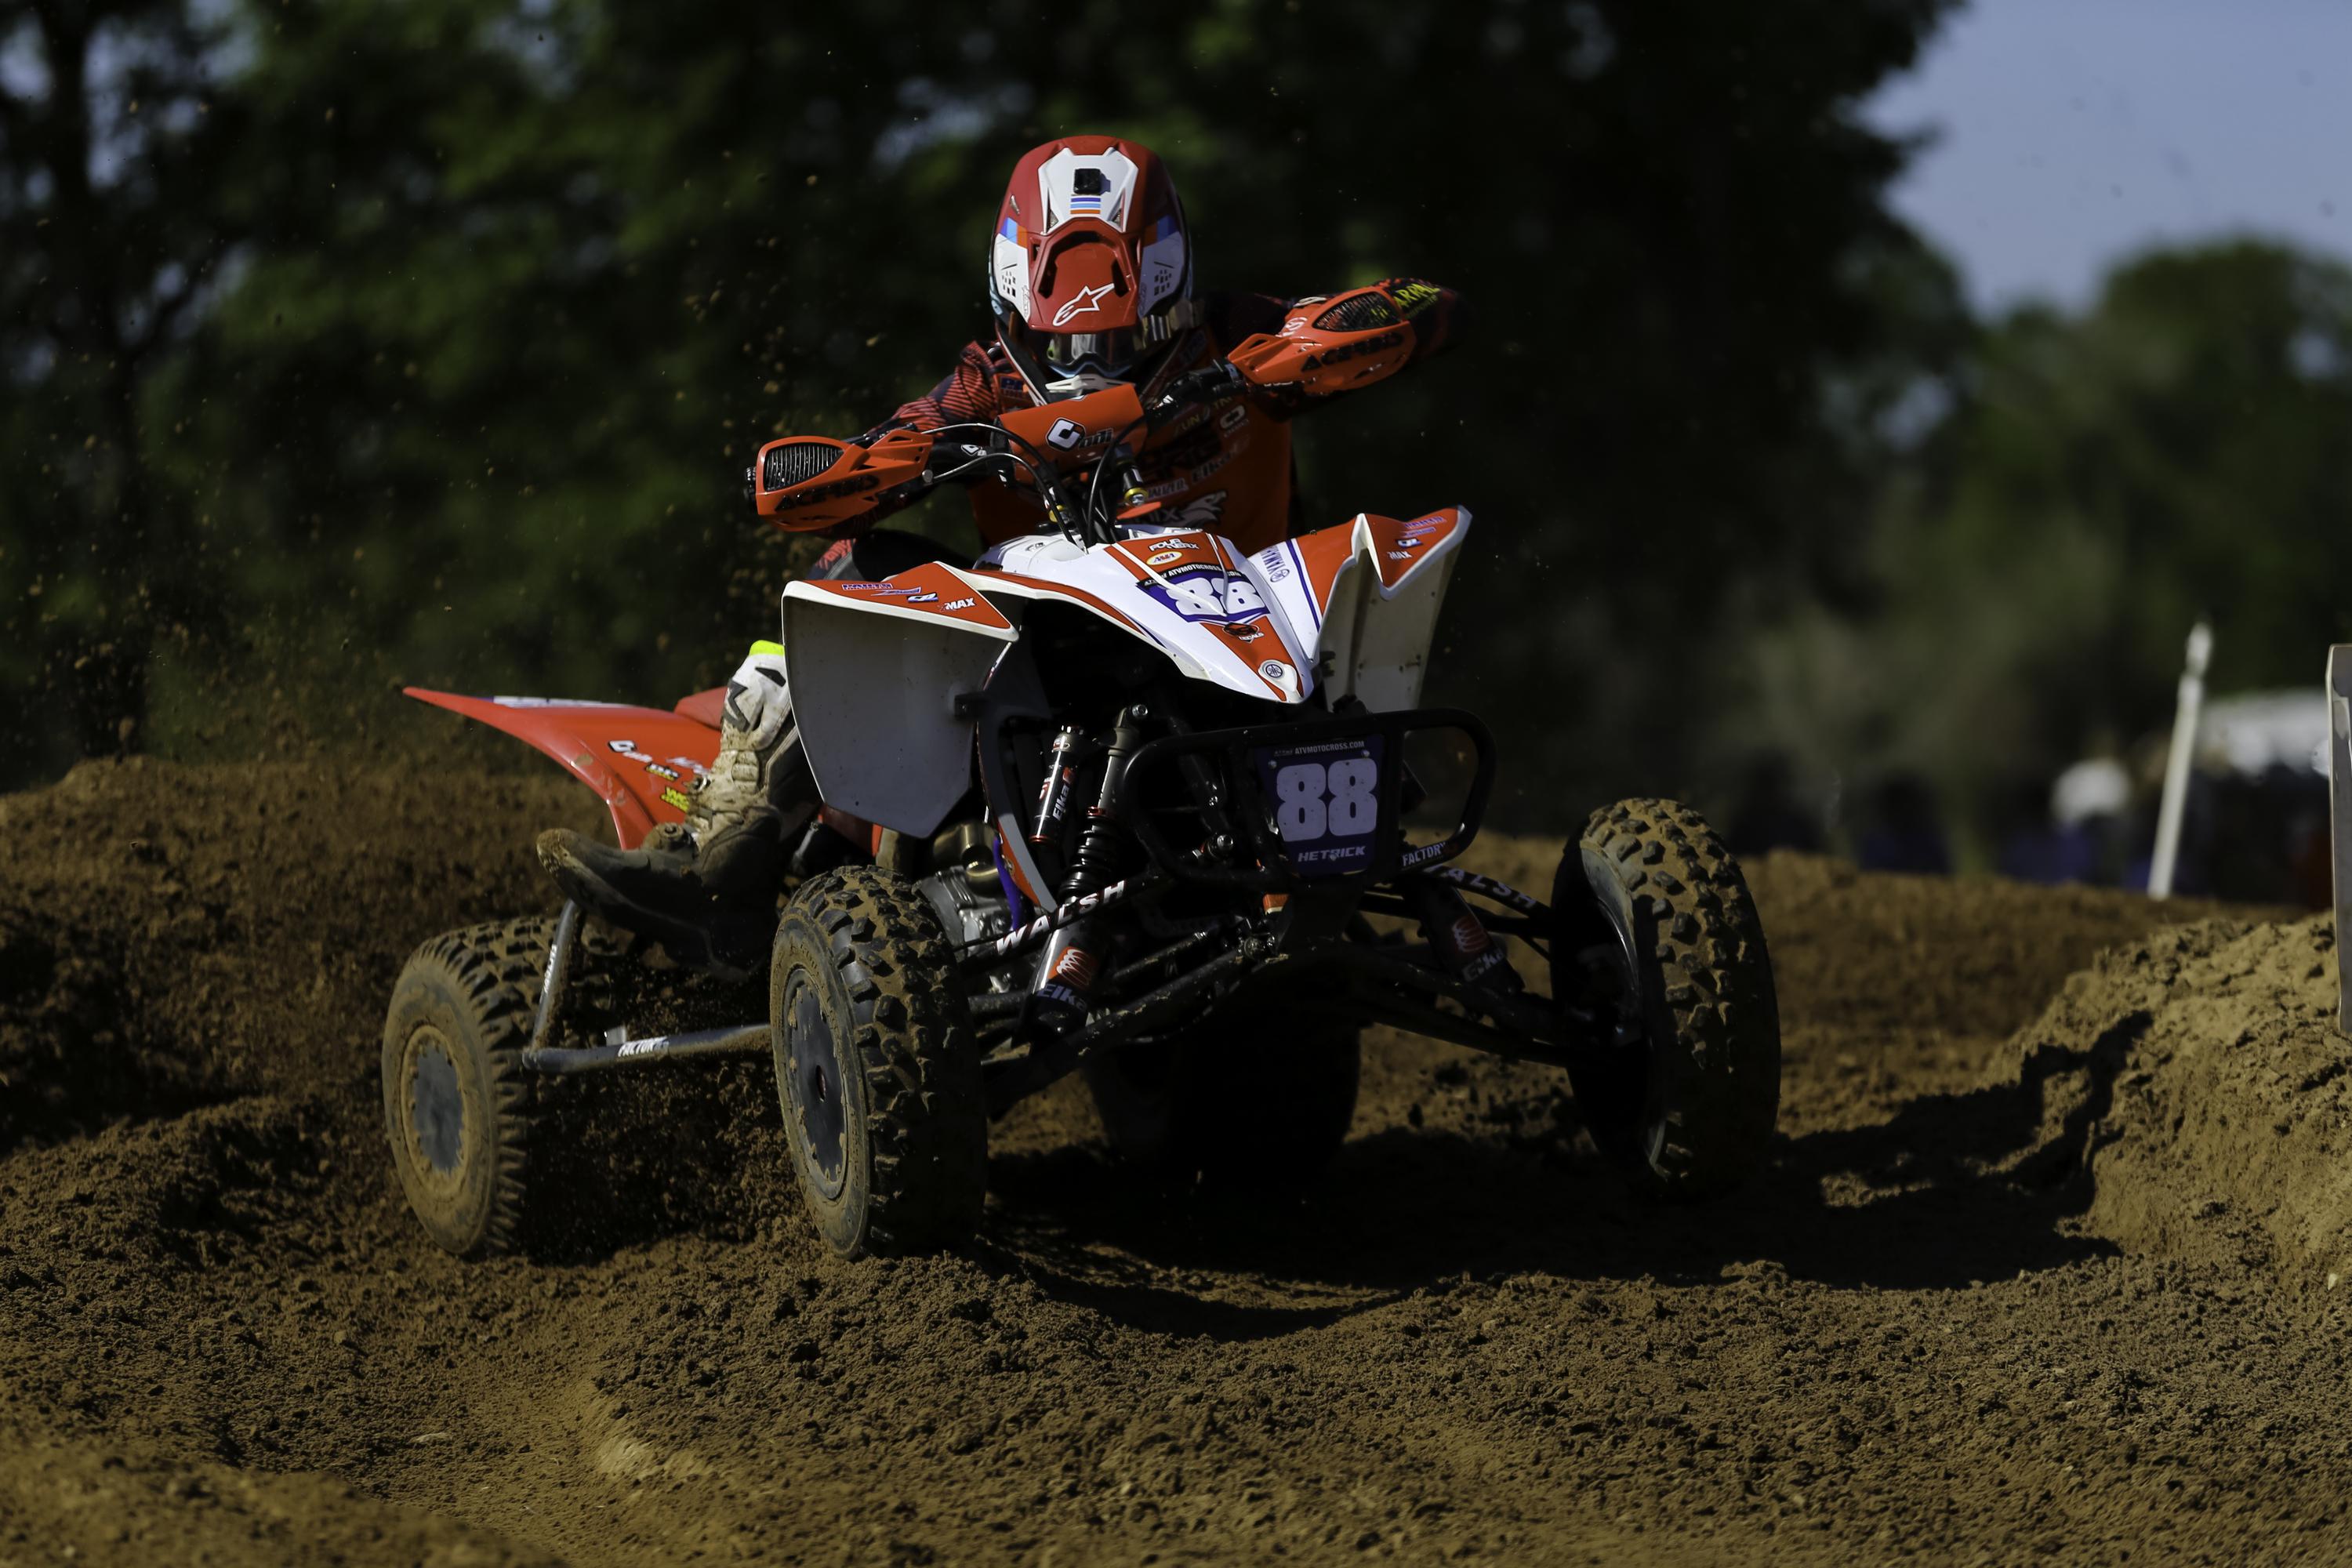 2021 ATV Motocross National Championship Heads to Pennsylvania For Round Three at High Point Raceway